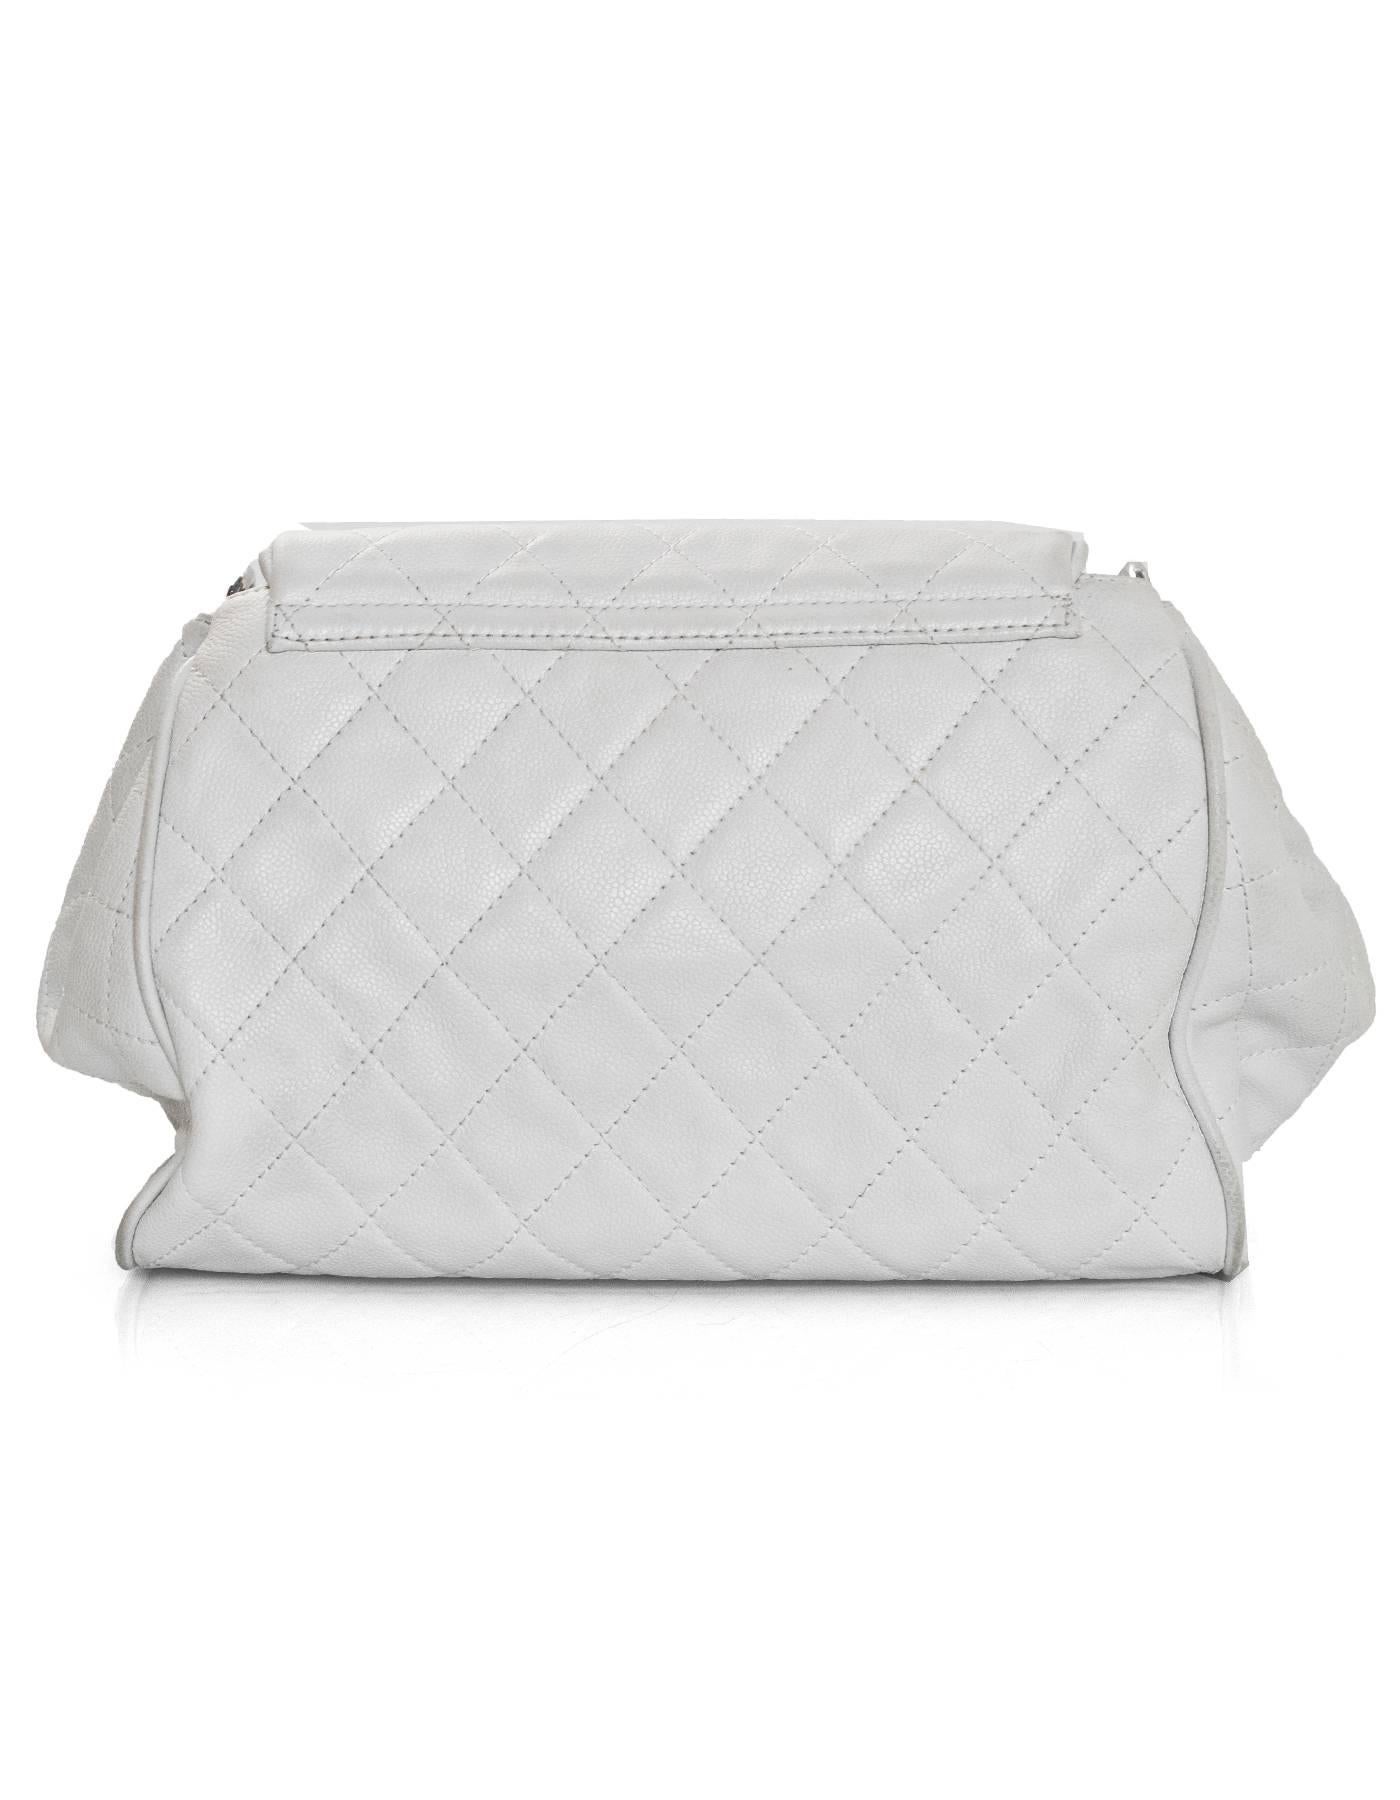 Chanel White Quilted Caviar Timeless Accordion Flap Bag
Features timeless CC stitched on front of flap top

Made In: France
Year of Production: 2008-2009
Color: White
Hardware: Silvertone
Materials: Leather and metal
Lining: White